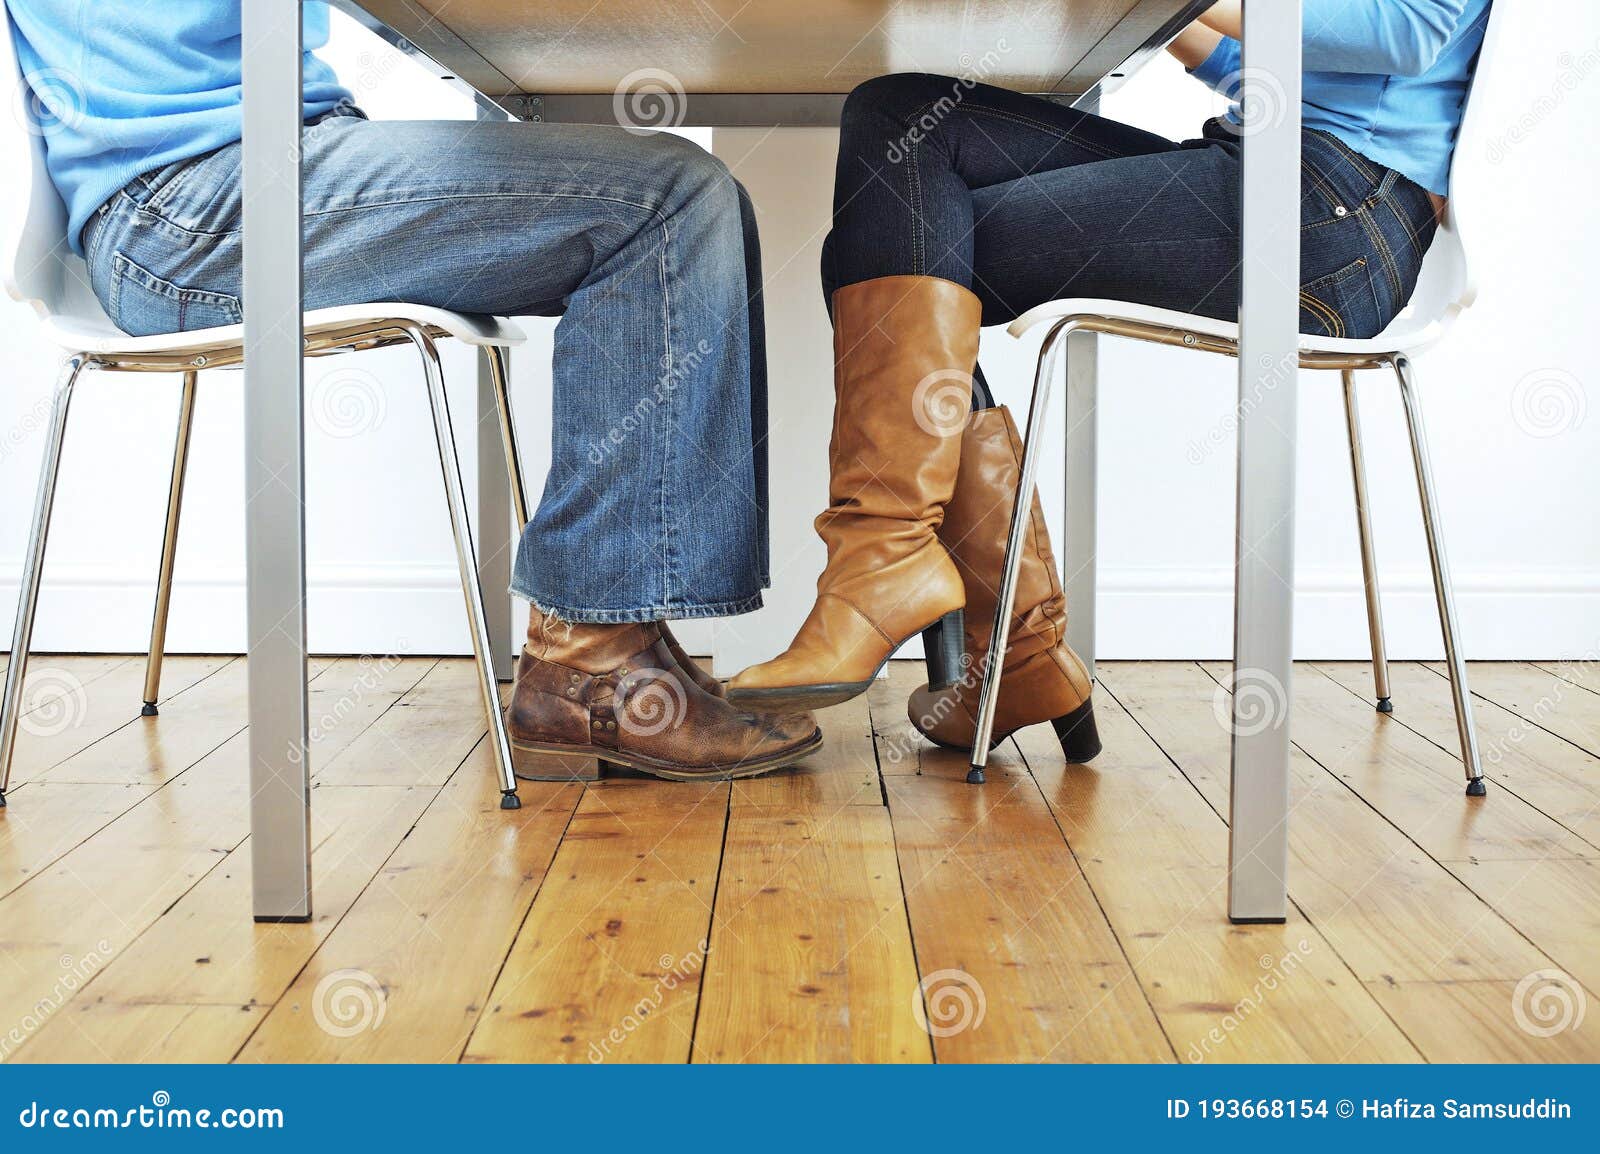 diane donaghey recommends Touching Legs Under The Table